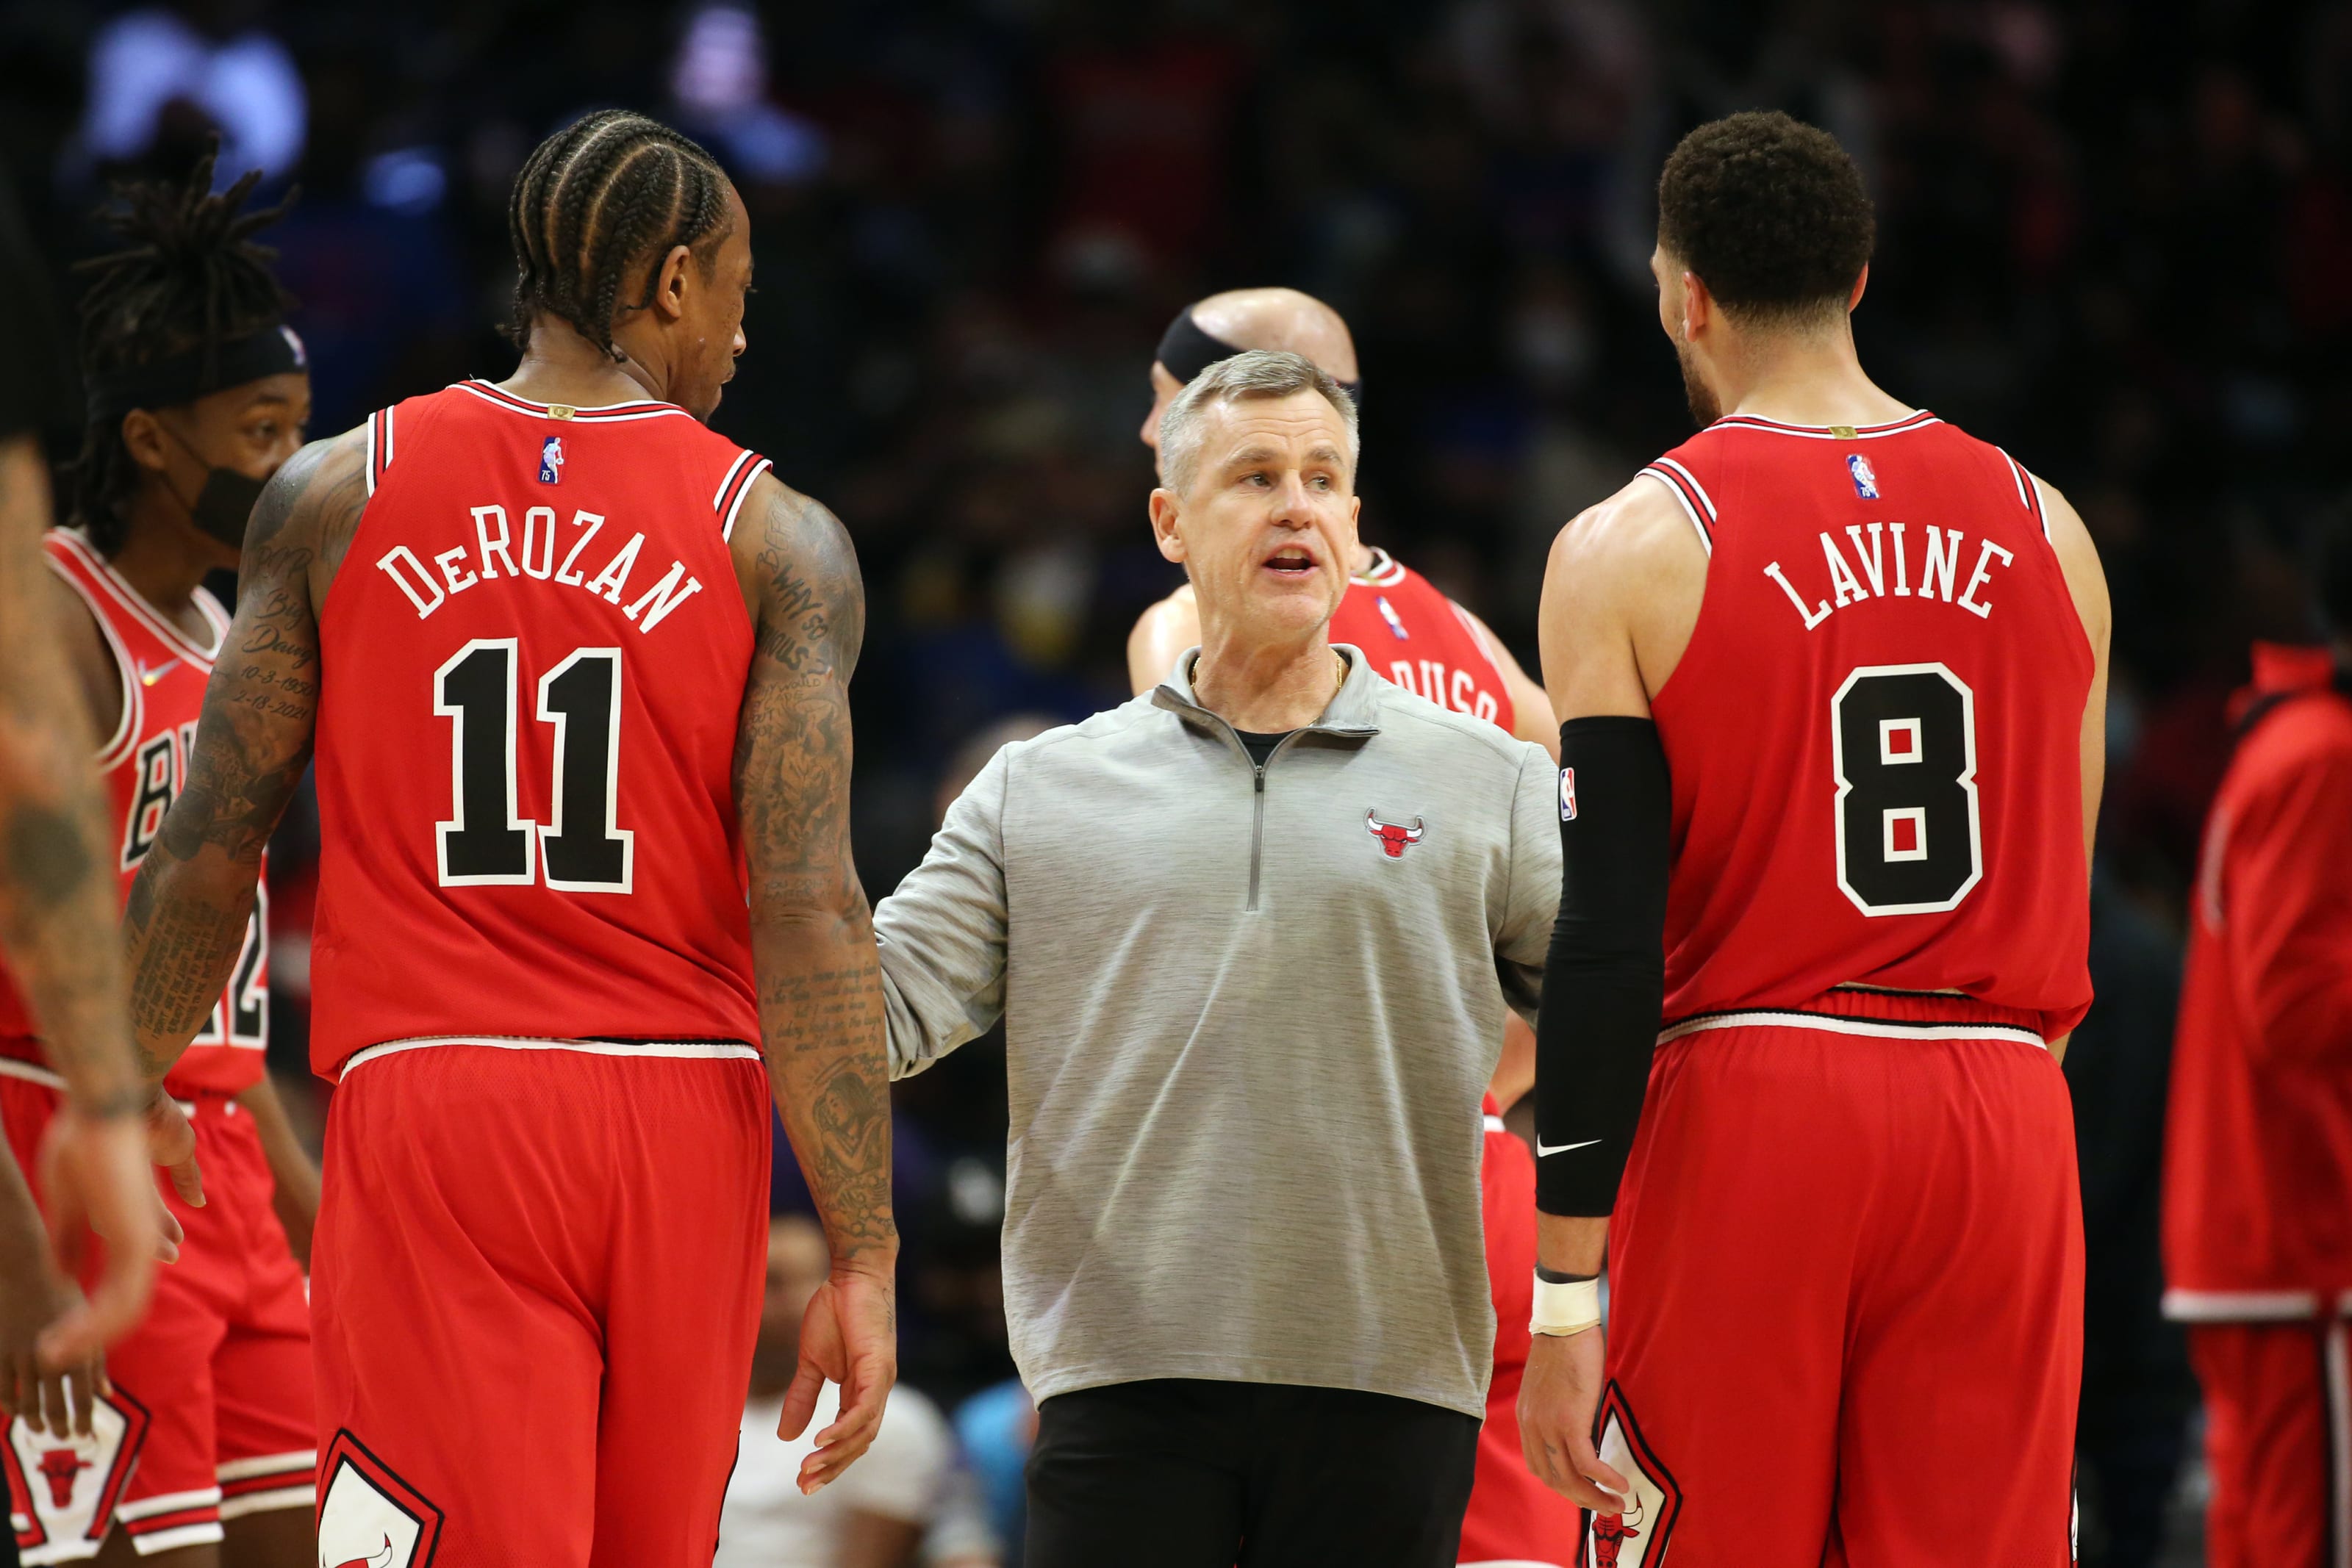 The Chicago Bulls will bounce back from their recent skid